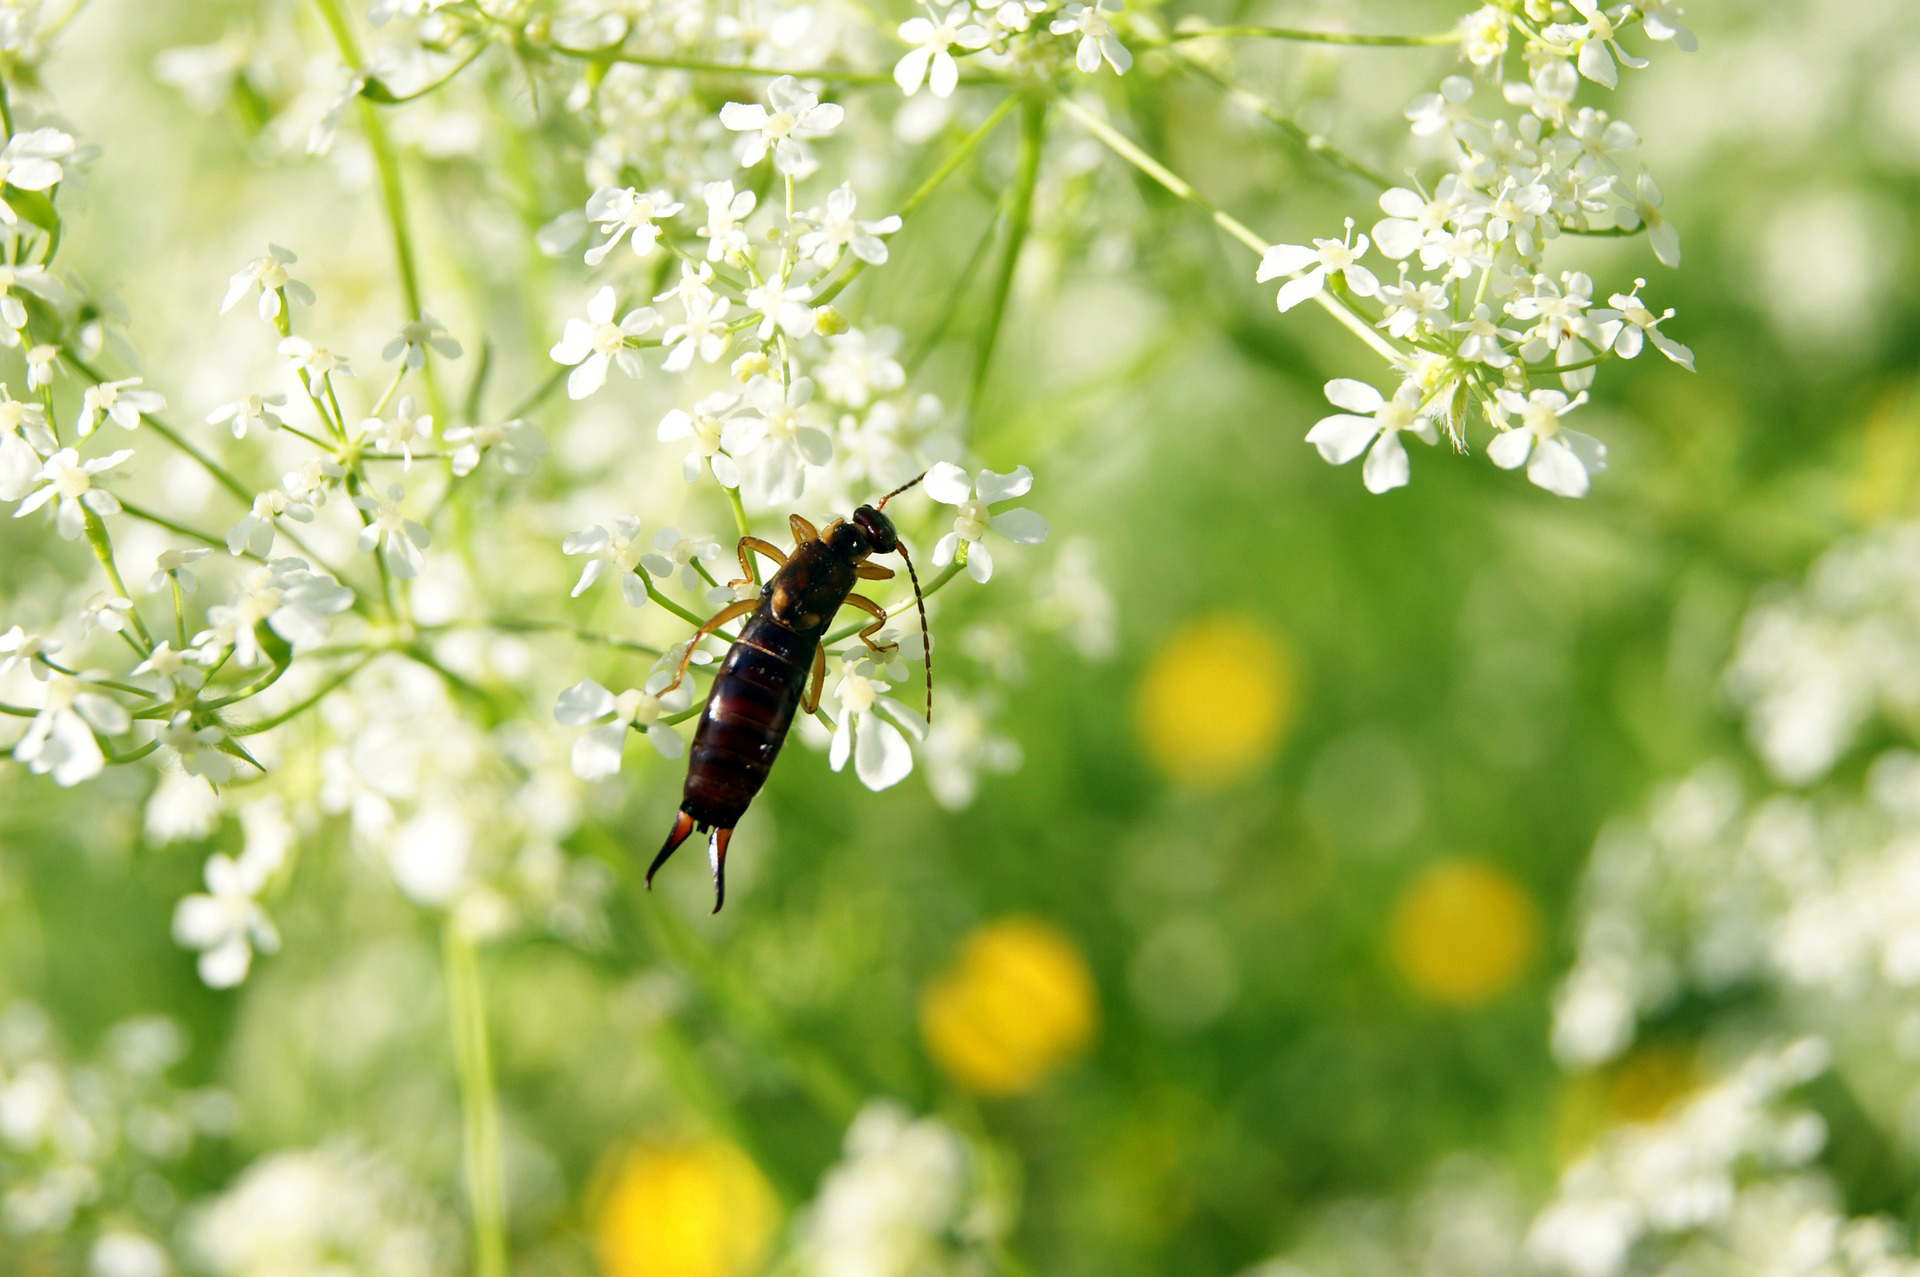 Earwigs How To Get Rid Of Earwigs Or Pincher Bugs The Old